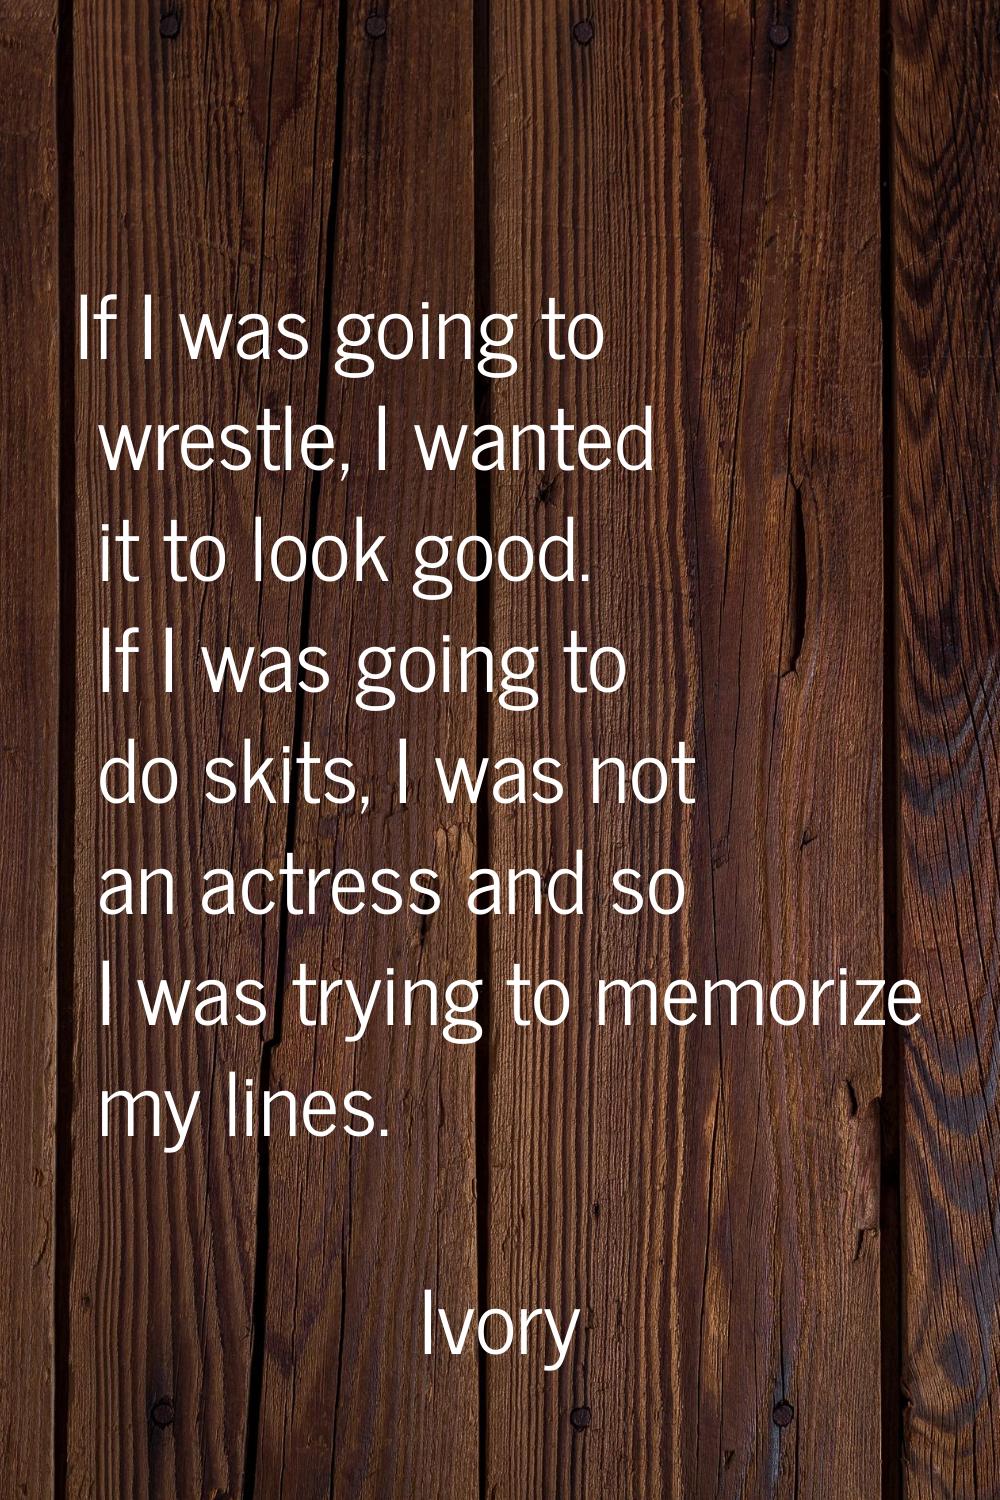 If I was going to wrestle, I wanted it to look good. If I was going to do skits, I was not an actre